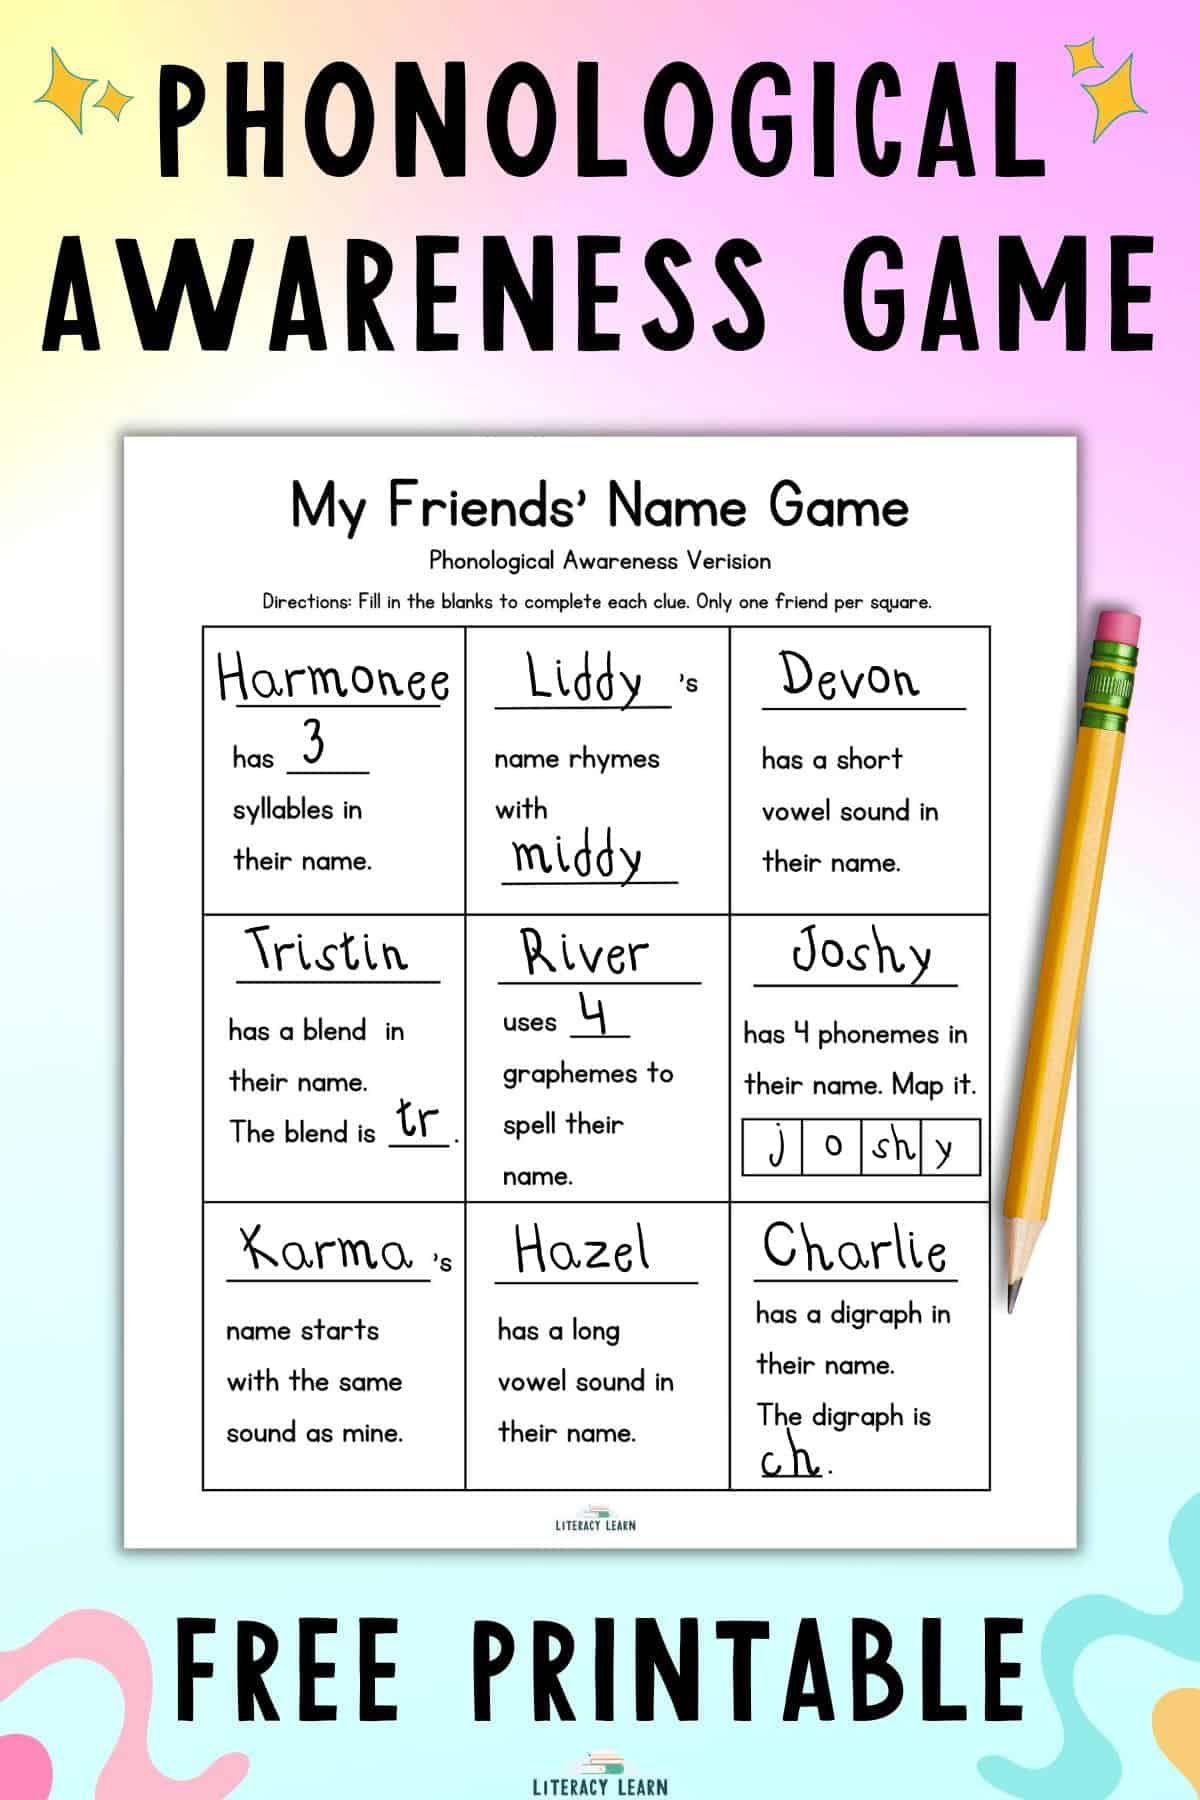 Multicolored background with title "Phonological Awareness Game Free Printable" and picture of the worksheet with pencil.